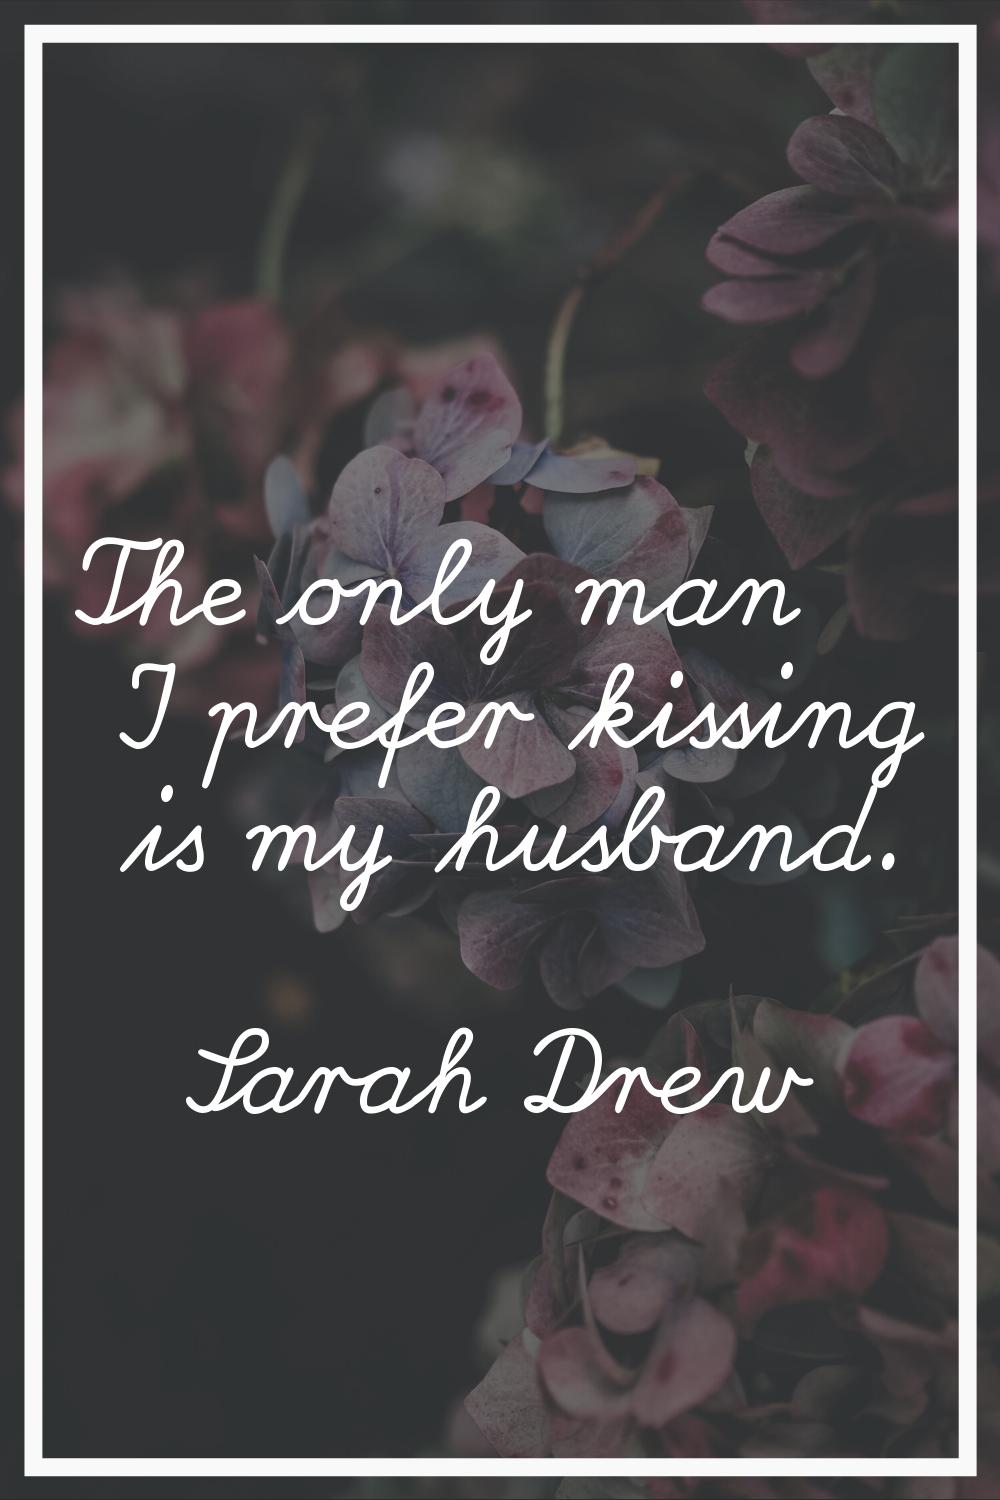 The only man I prefer kissing is my husband.